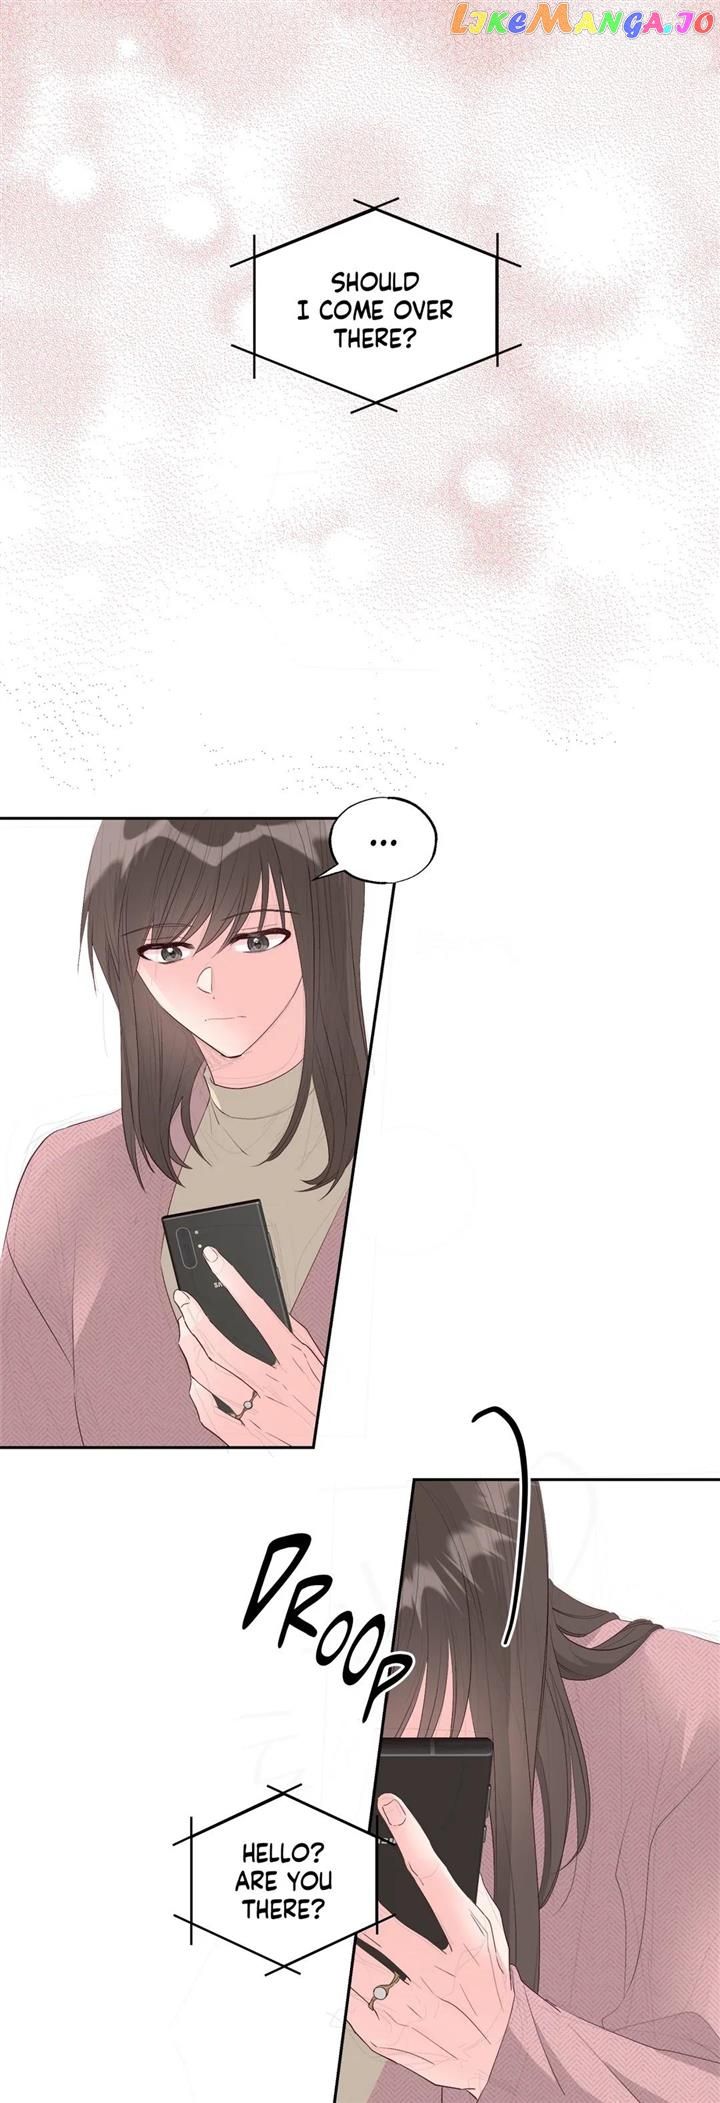 Learning to Love You chapter 49 - Page 1